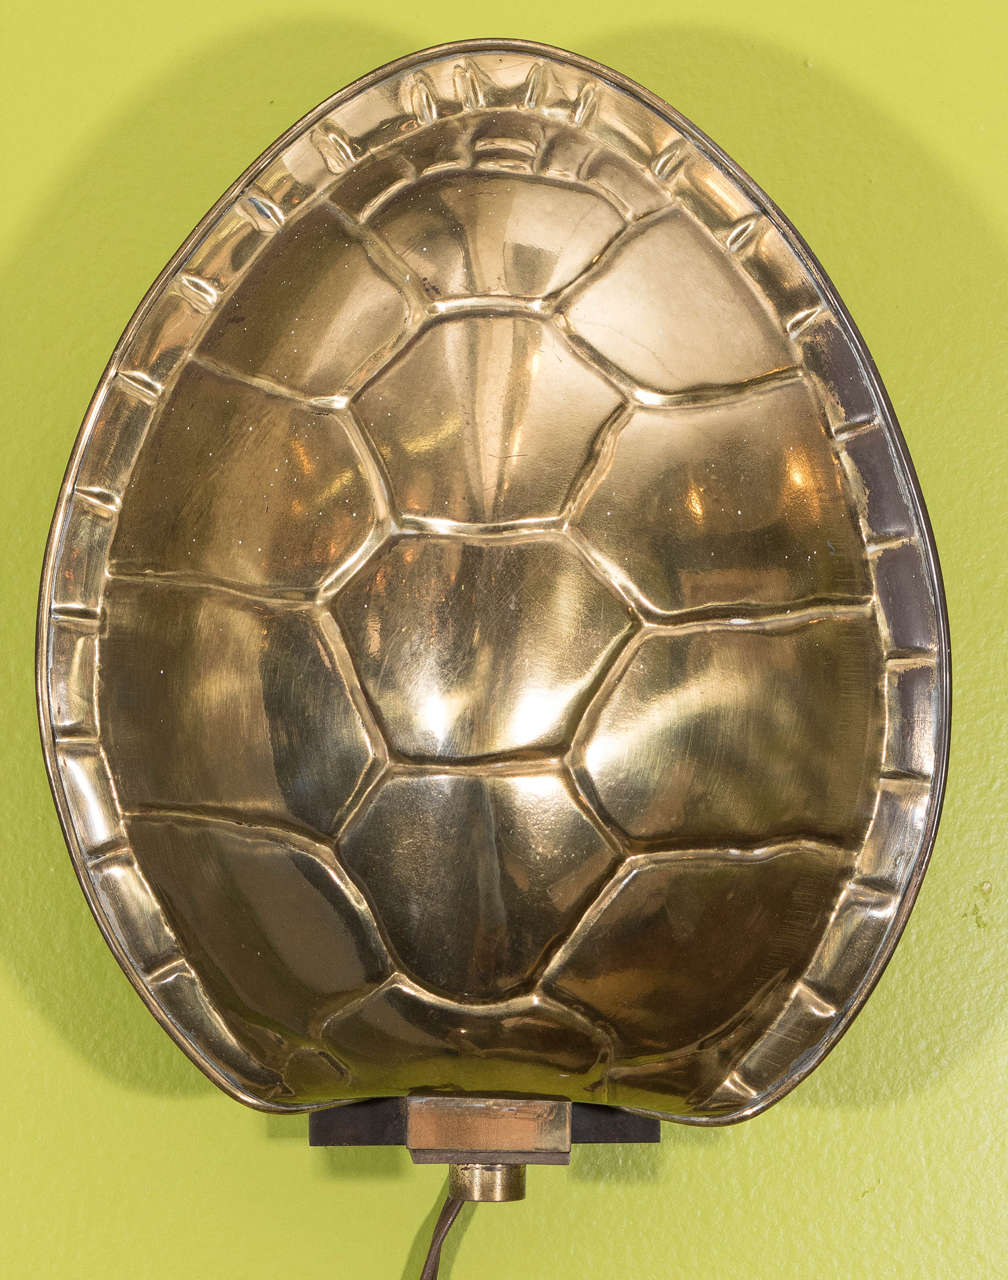 A vintage sconce, with polished brass shade in the form of a tortoise (or turtle) shell, produced between 1970 and 1980 by Chapman Manufacturing Company. Requires one Edison base bulb. Very good condition, with age appropriate wear and patina.